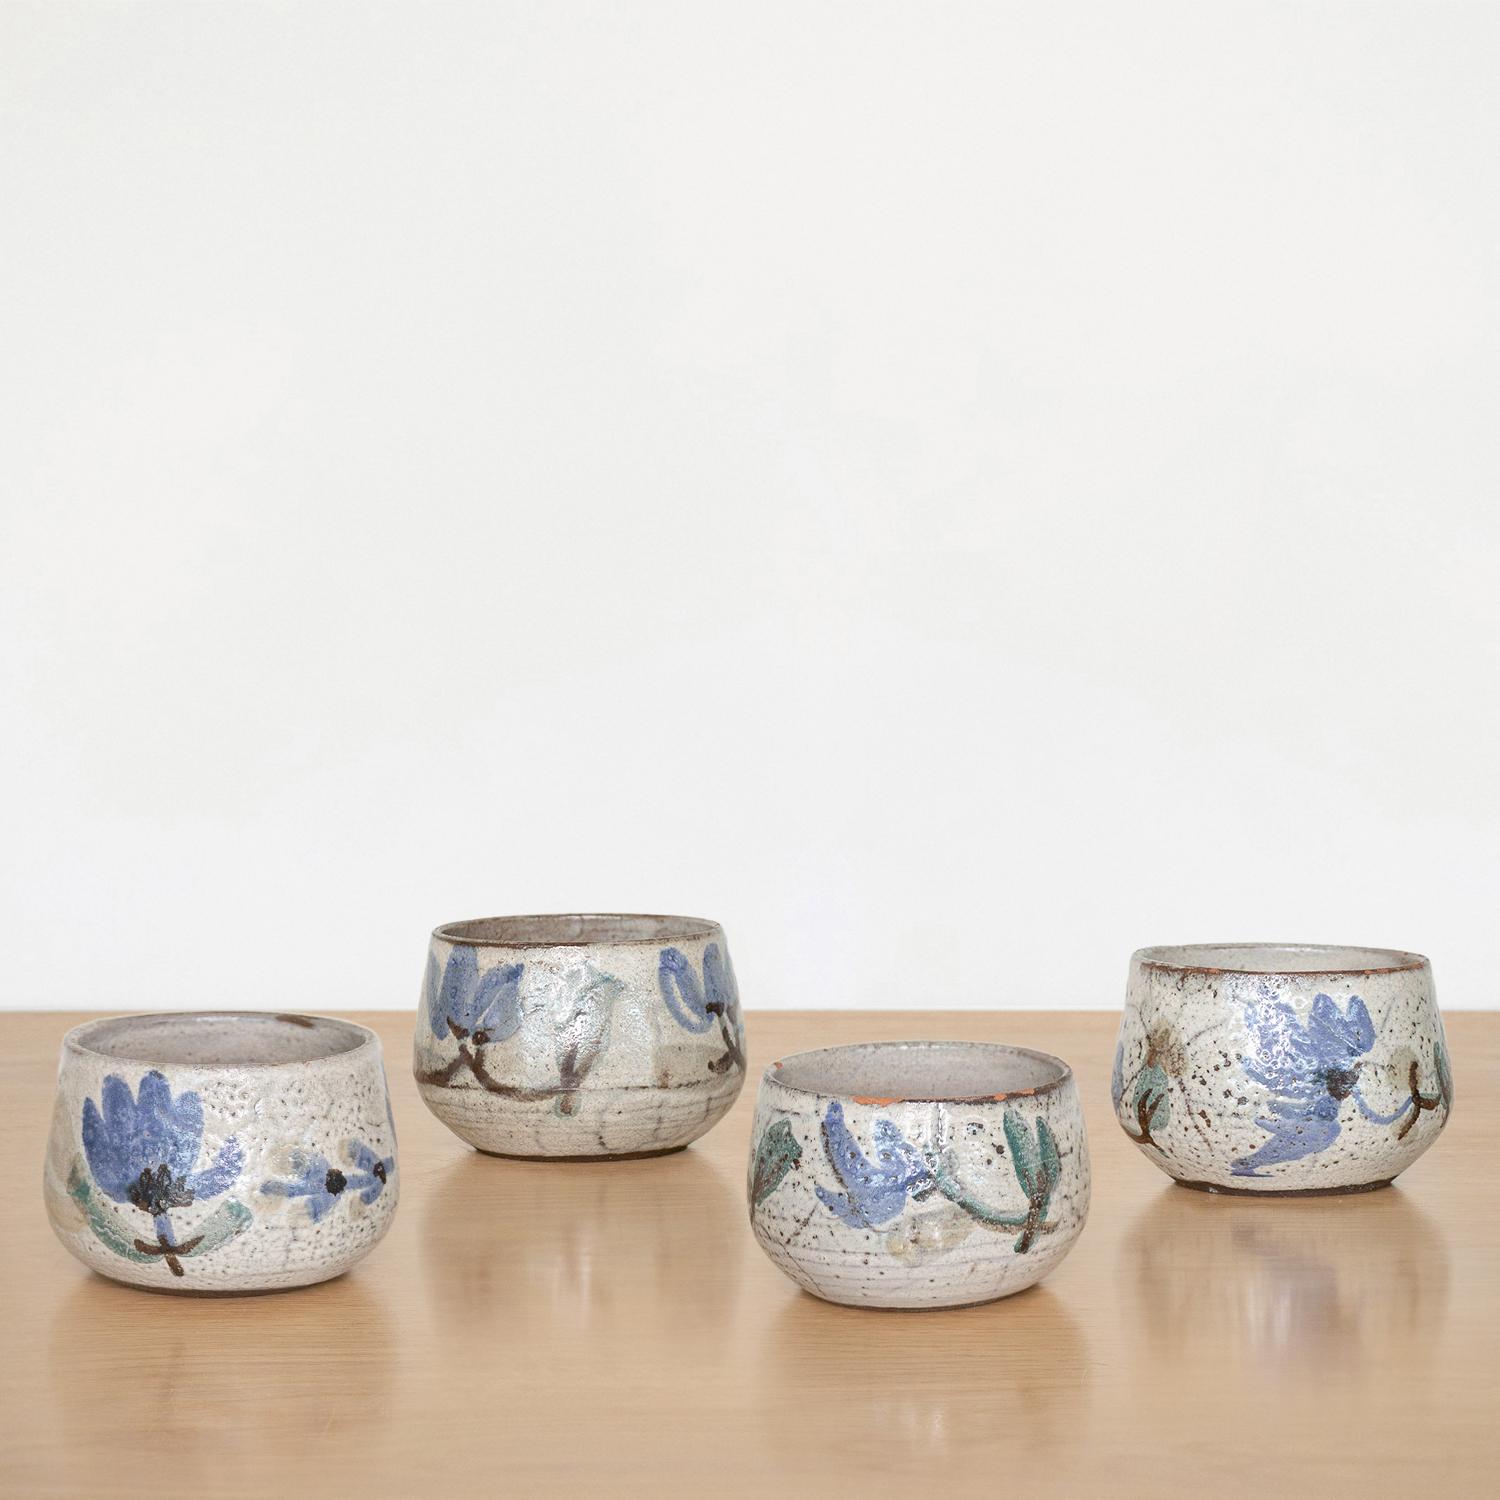 Beautiful painted ceramic cup set from France, 1950s. Curved with hand painted flower motif in blue and grey coloring. Made by French ceramic artist Gustave Reynaud. Sold as a set of four.